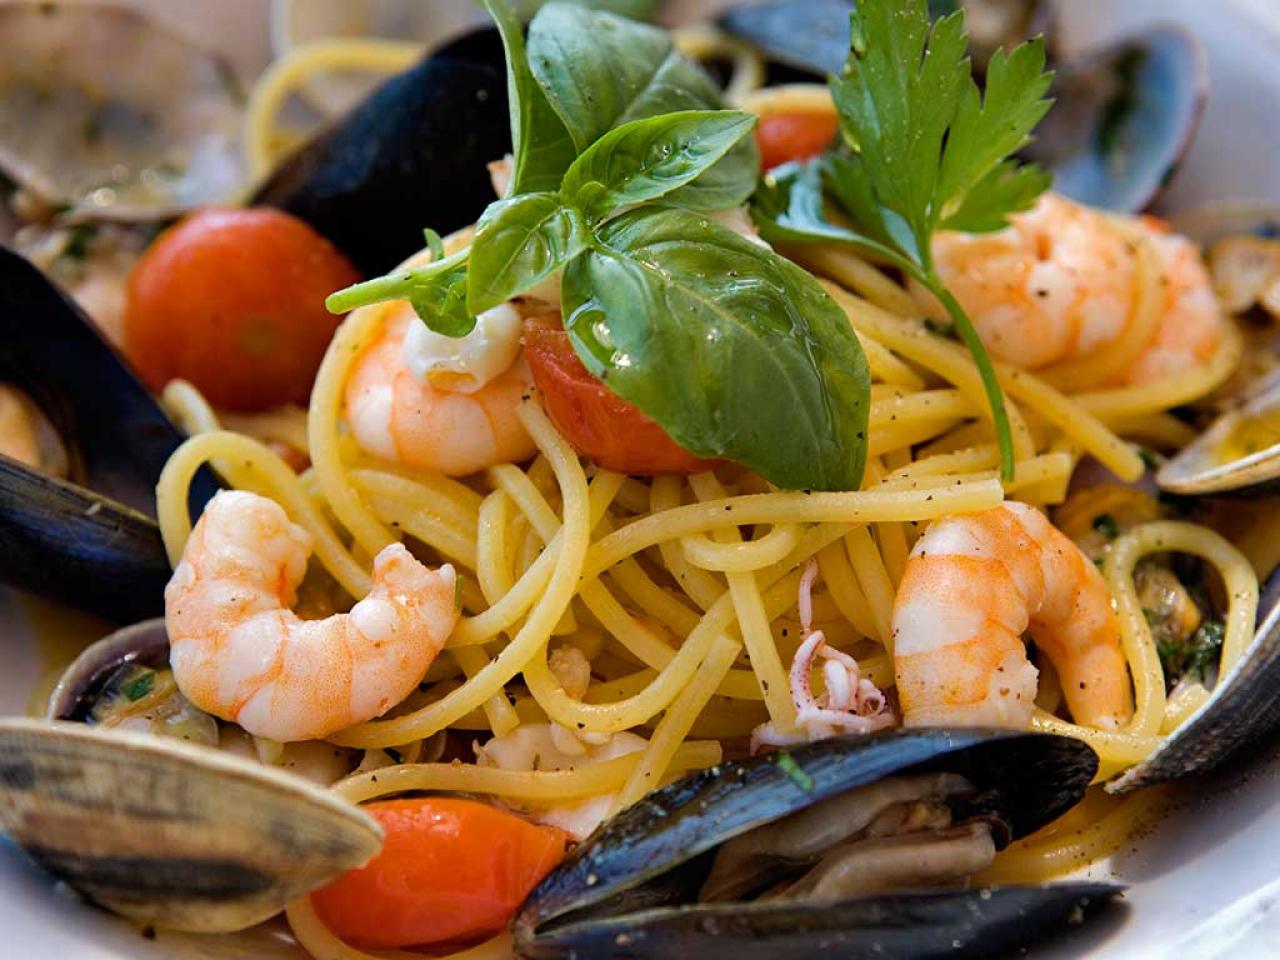 culinary tourism in italy